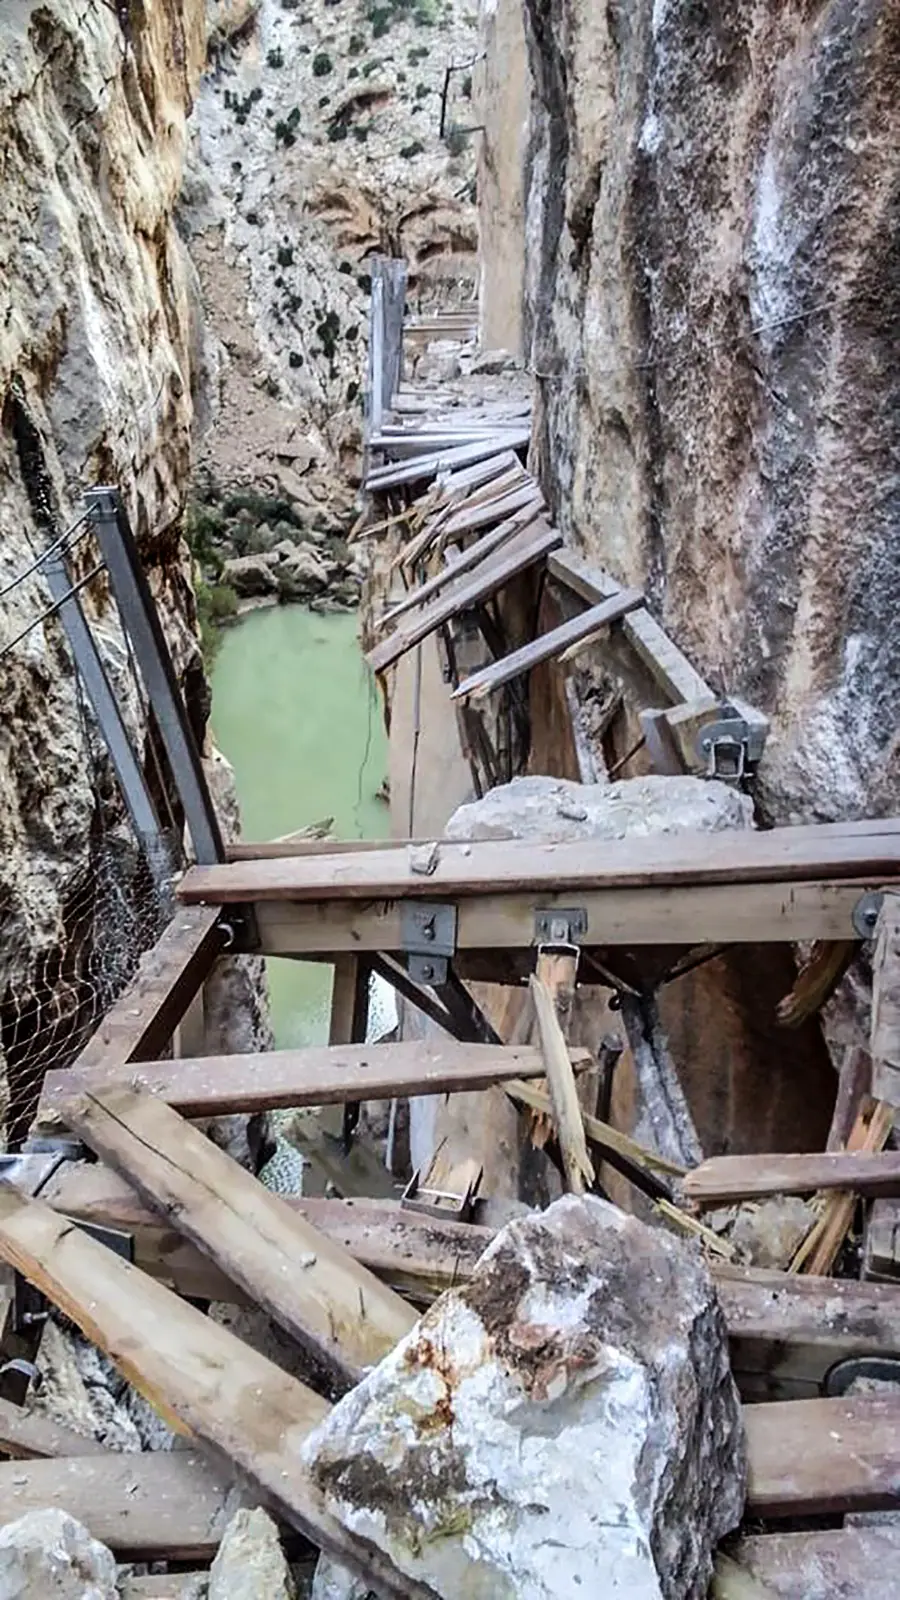 The viral image of the structure damaged by falling stones on the Caminito del Rey, the authorship is unknown